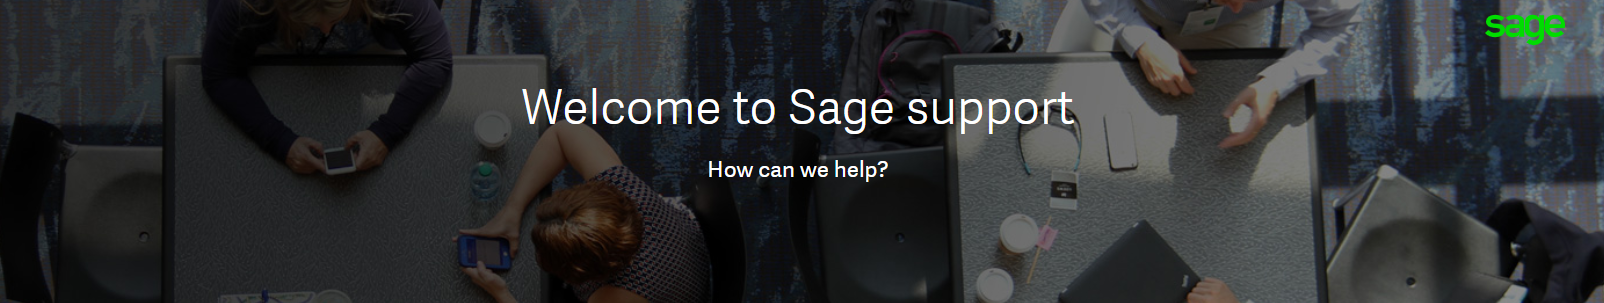 Welcome to Sage support